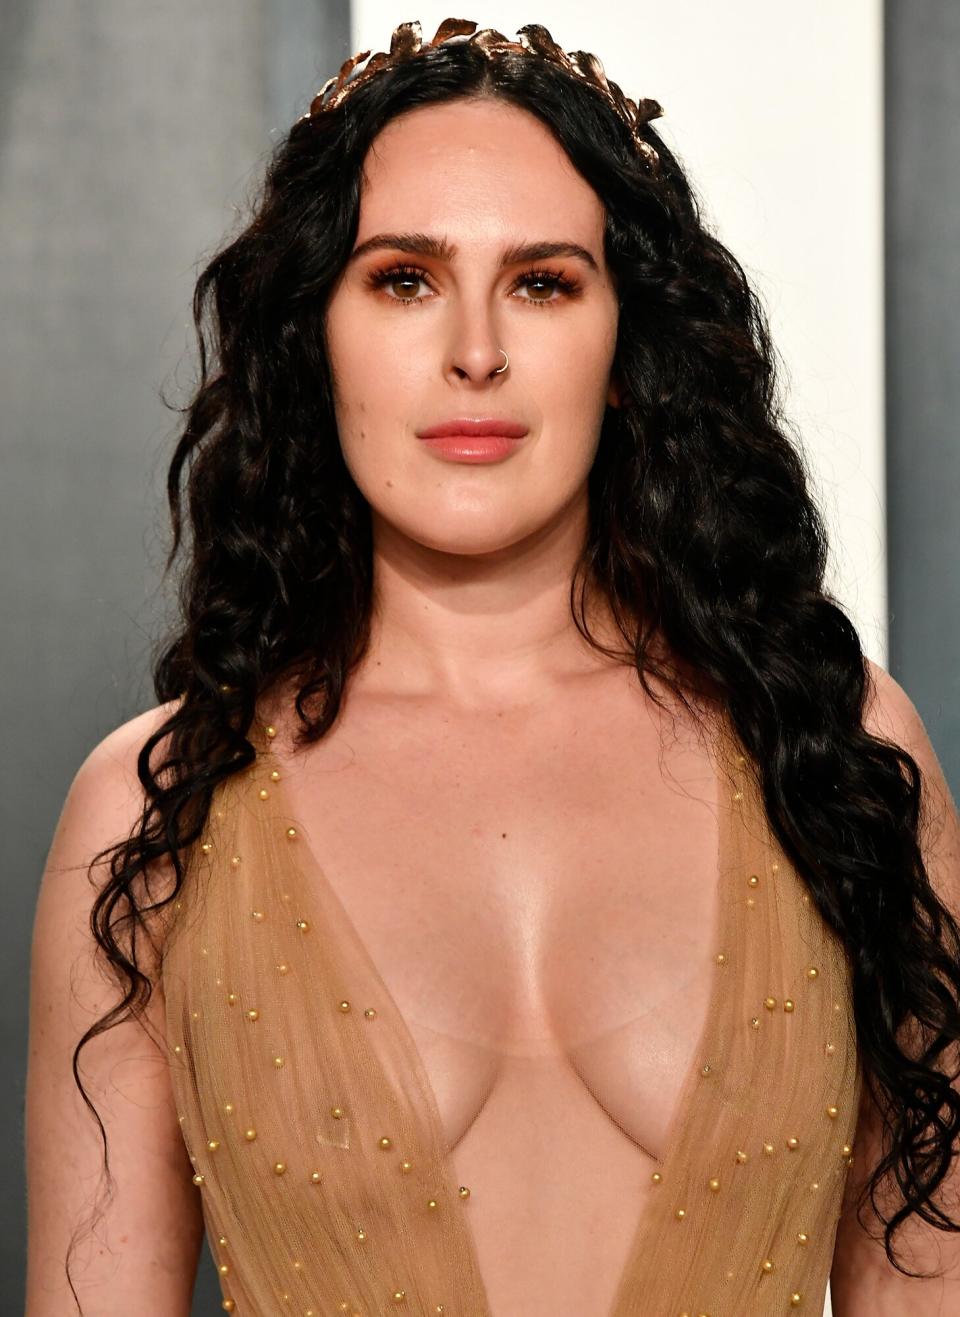 Rumer Willis attends the 2020 Vanity Fair Oscar Party hosted by Radhika Jones at Wallis Annenberg Center for the Performing Arts on February 09, 2020 in Beverly Hills, California